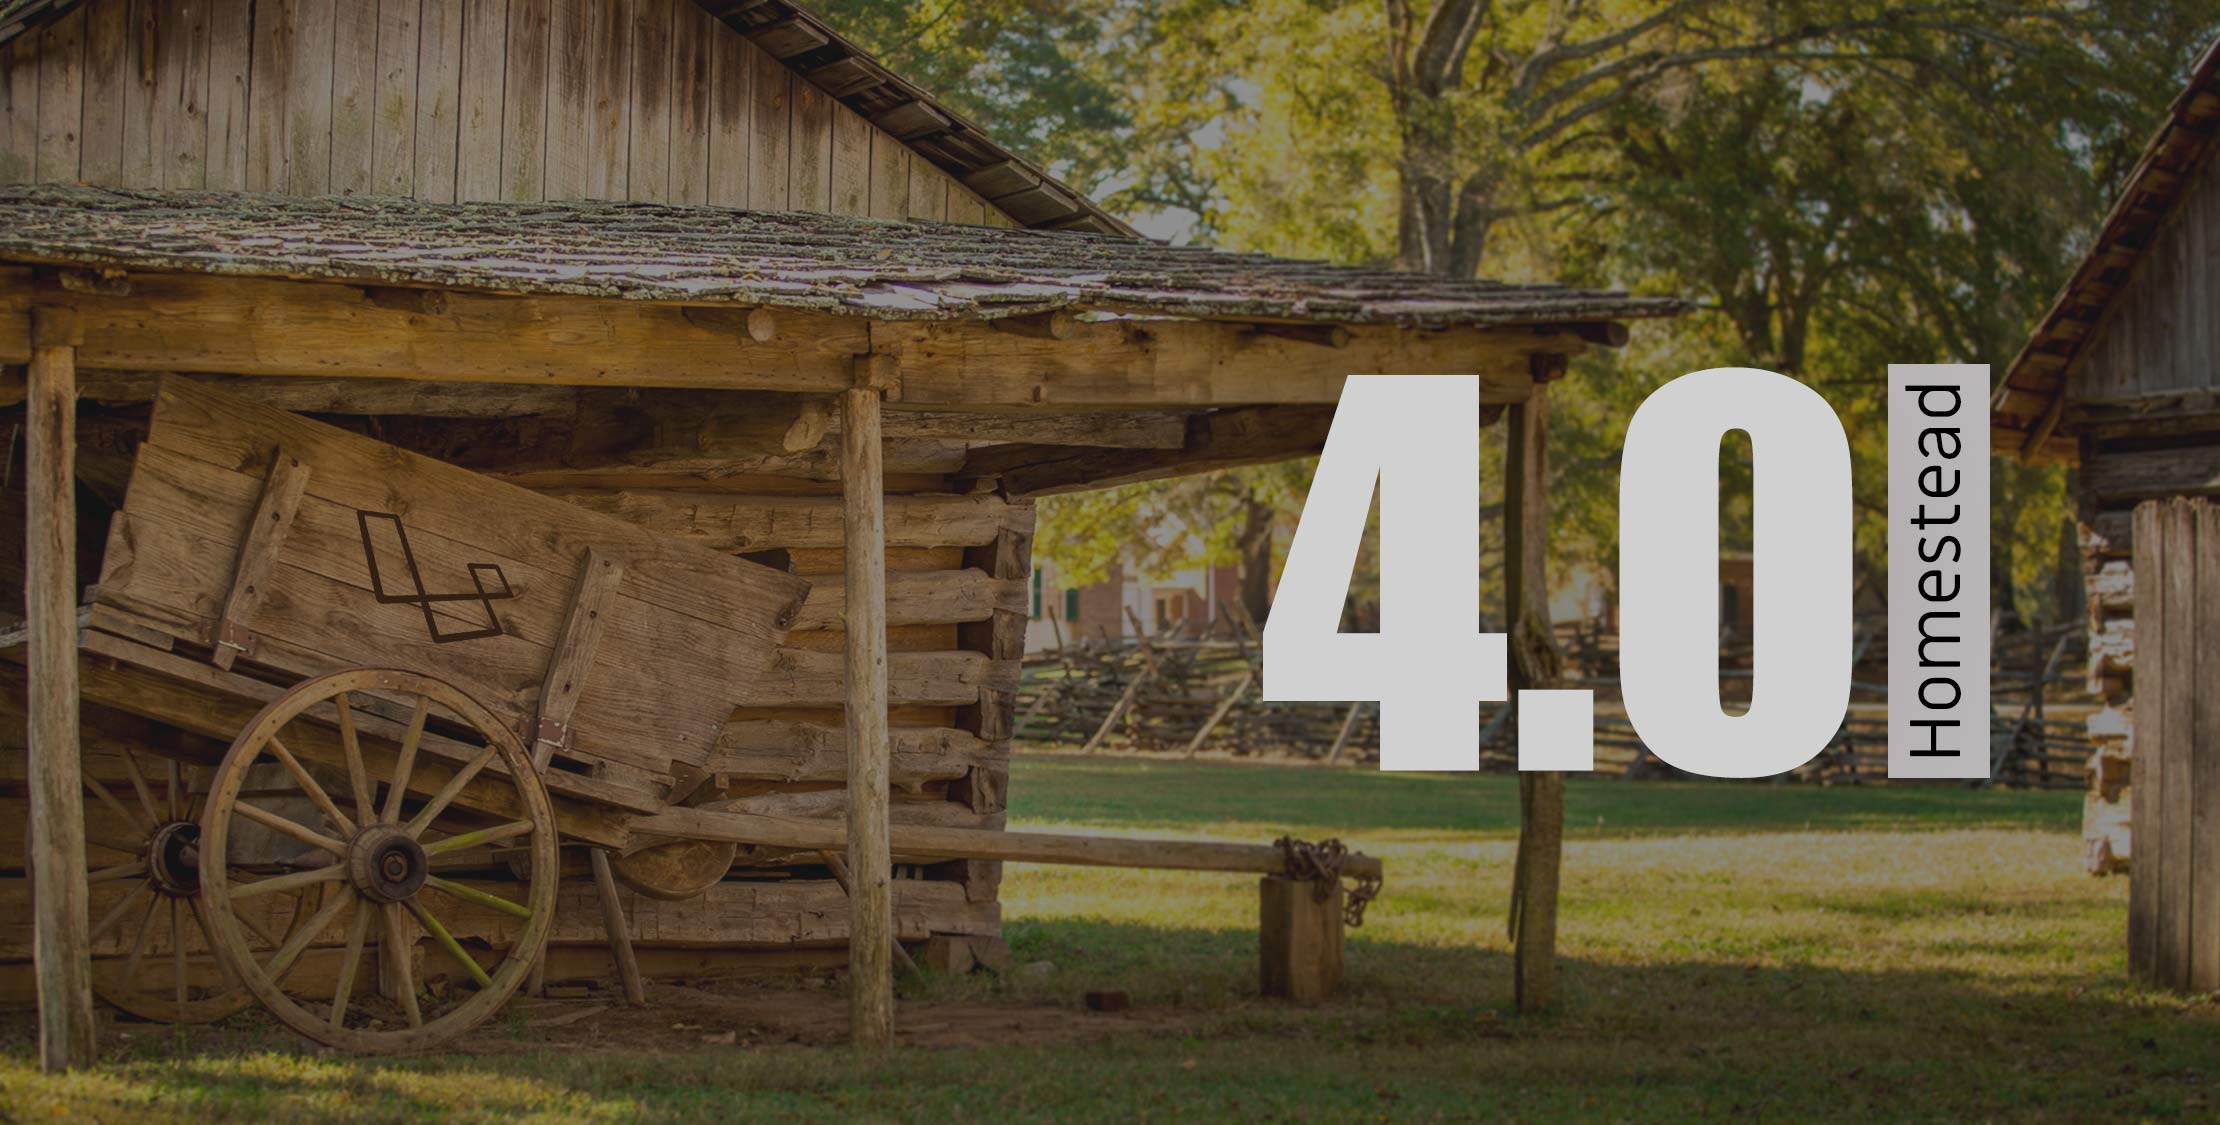 Laravel Homestead 4.0 is released featuring support for PHP 7.1 image